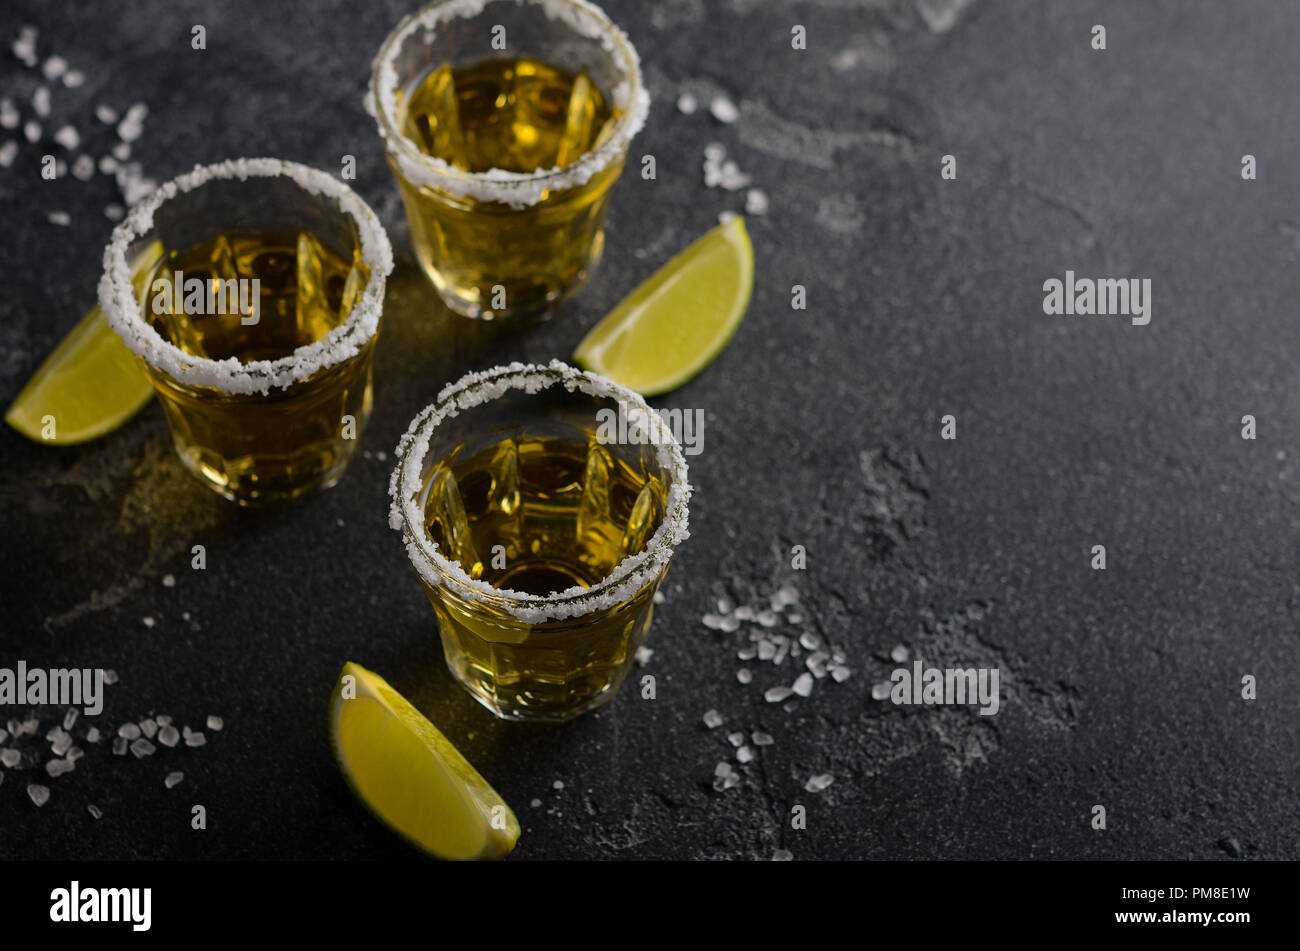 Gold tequila with lime and salt rim on dark stone or concrete background, selective focus. Stock Photo